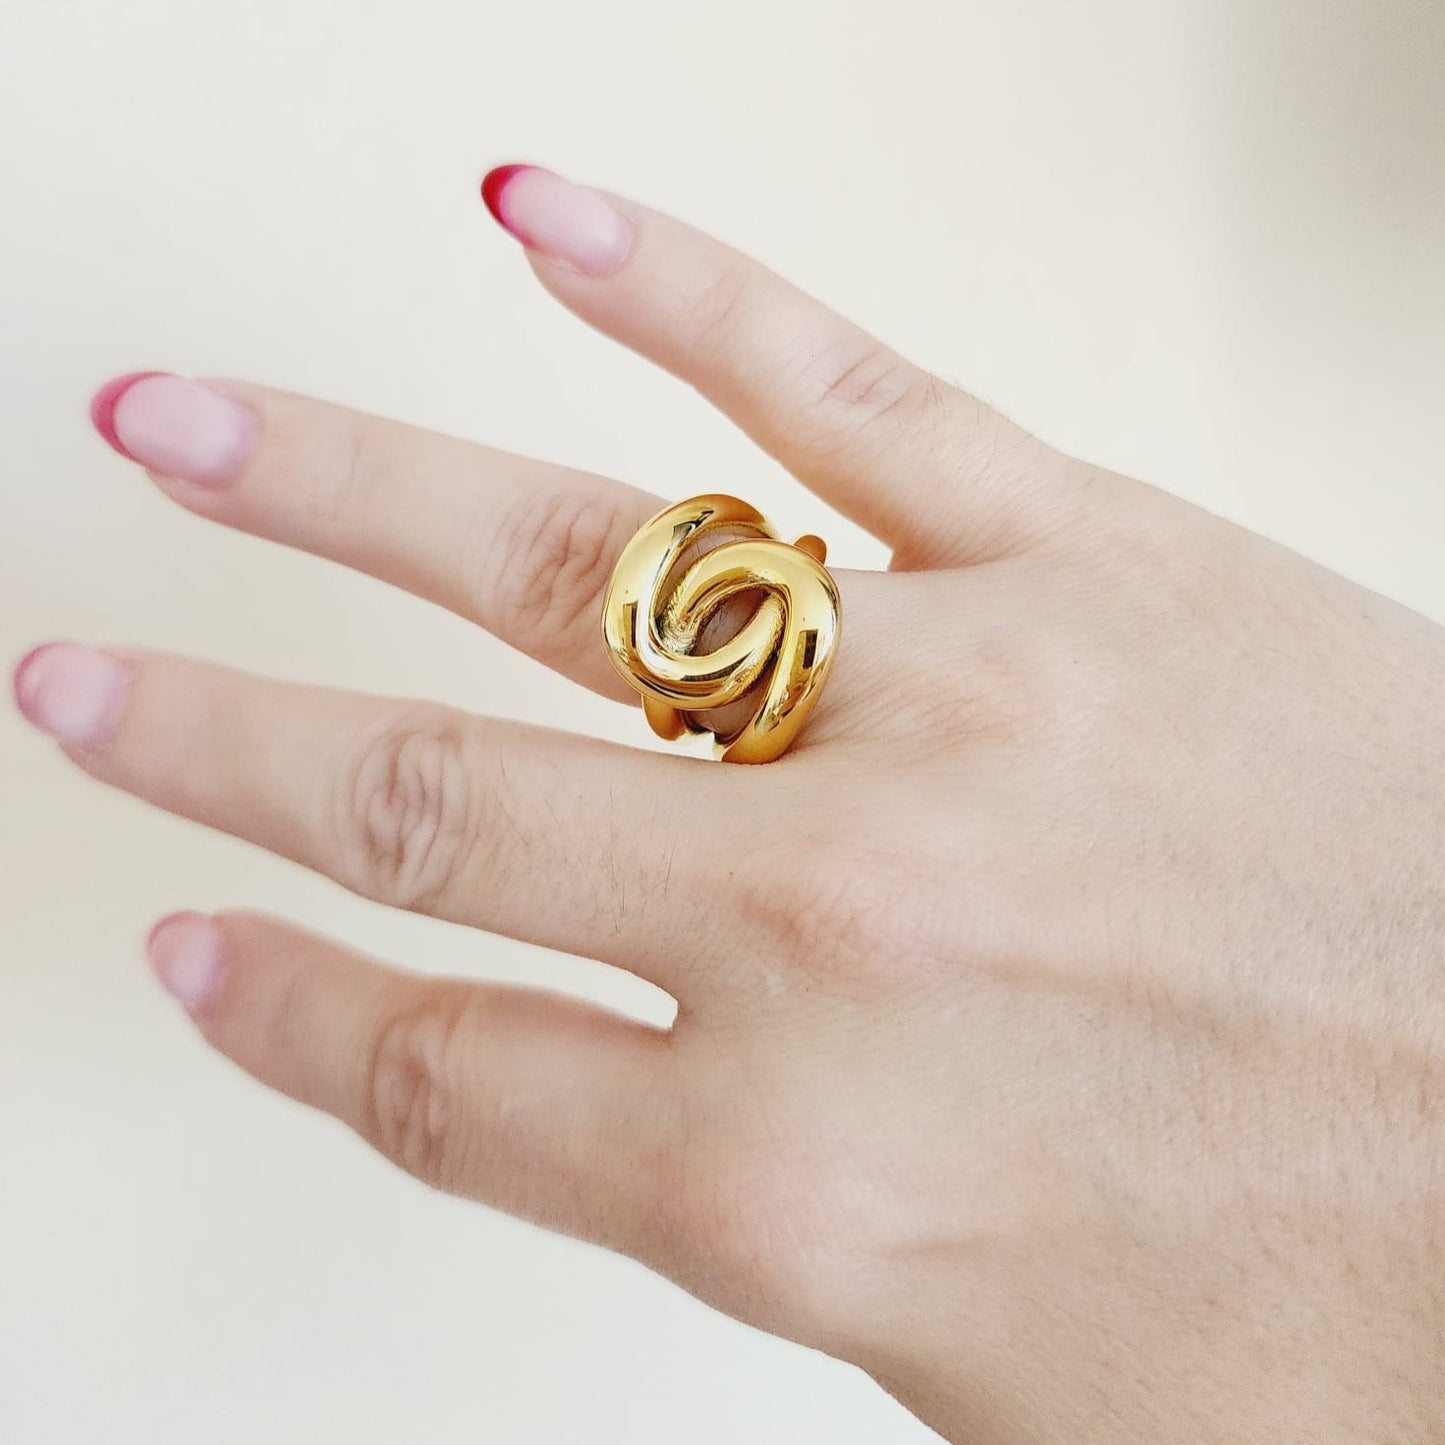 Water Resistant Jewelry, Knot Gold ring, Knot bold ring, Fashion Gold Color Irregular Ring Fashion Hollow Rings For Women Man Minimalism  Water Resistant sweat resistant jewelry water resistance jewelry  Vintage Rings  Vintage Modern Rings  tarnish free jewelry